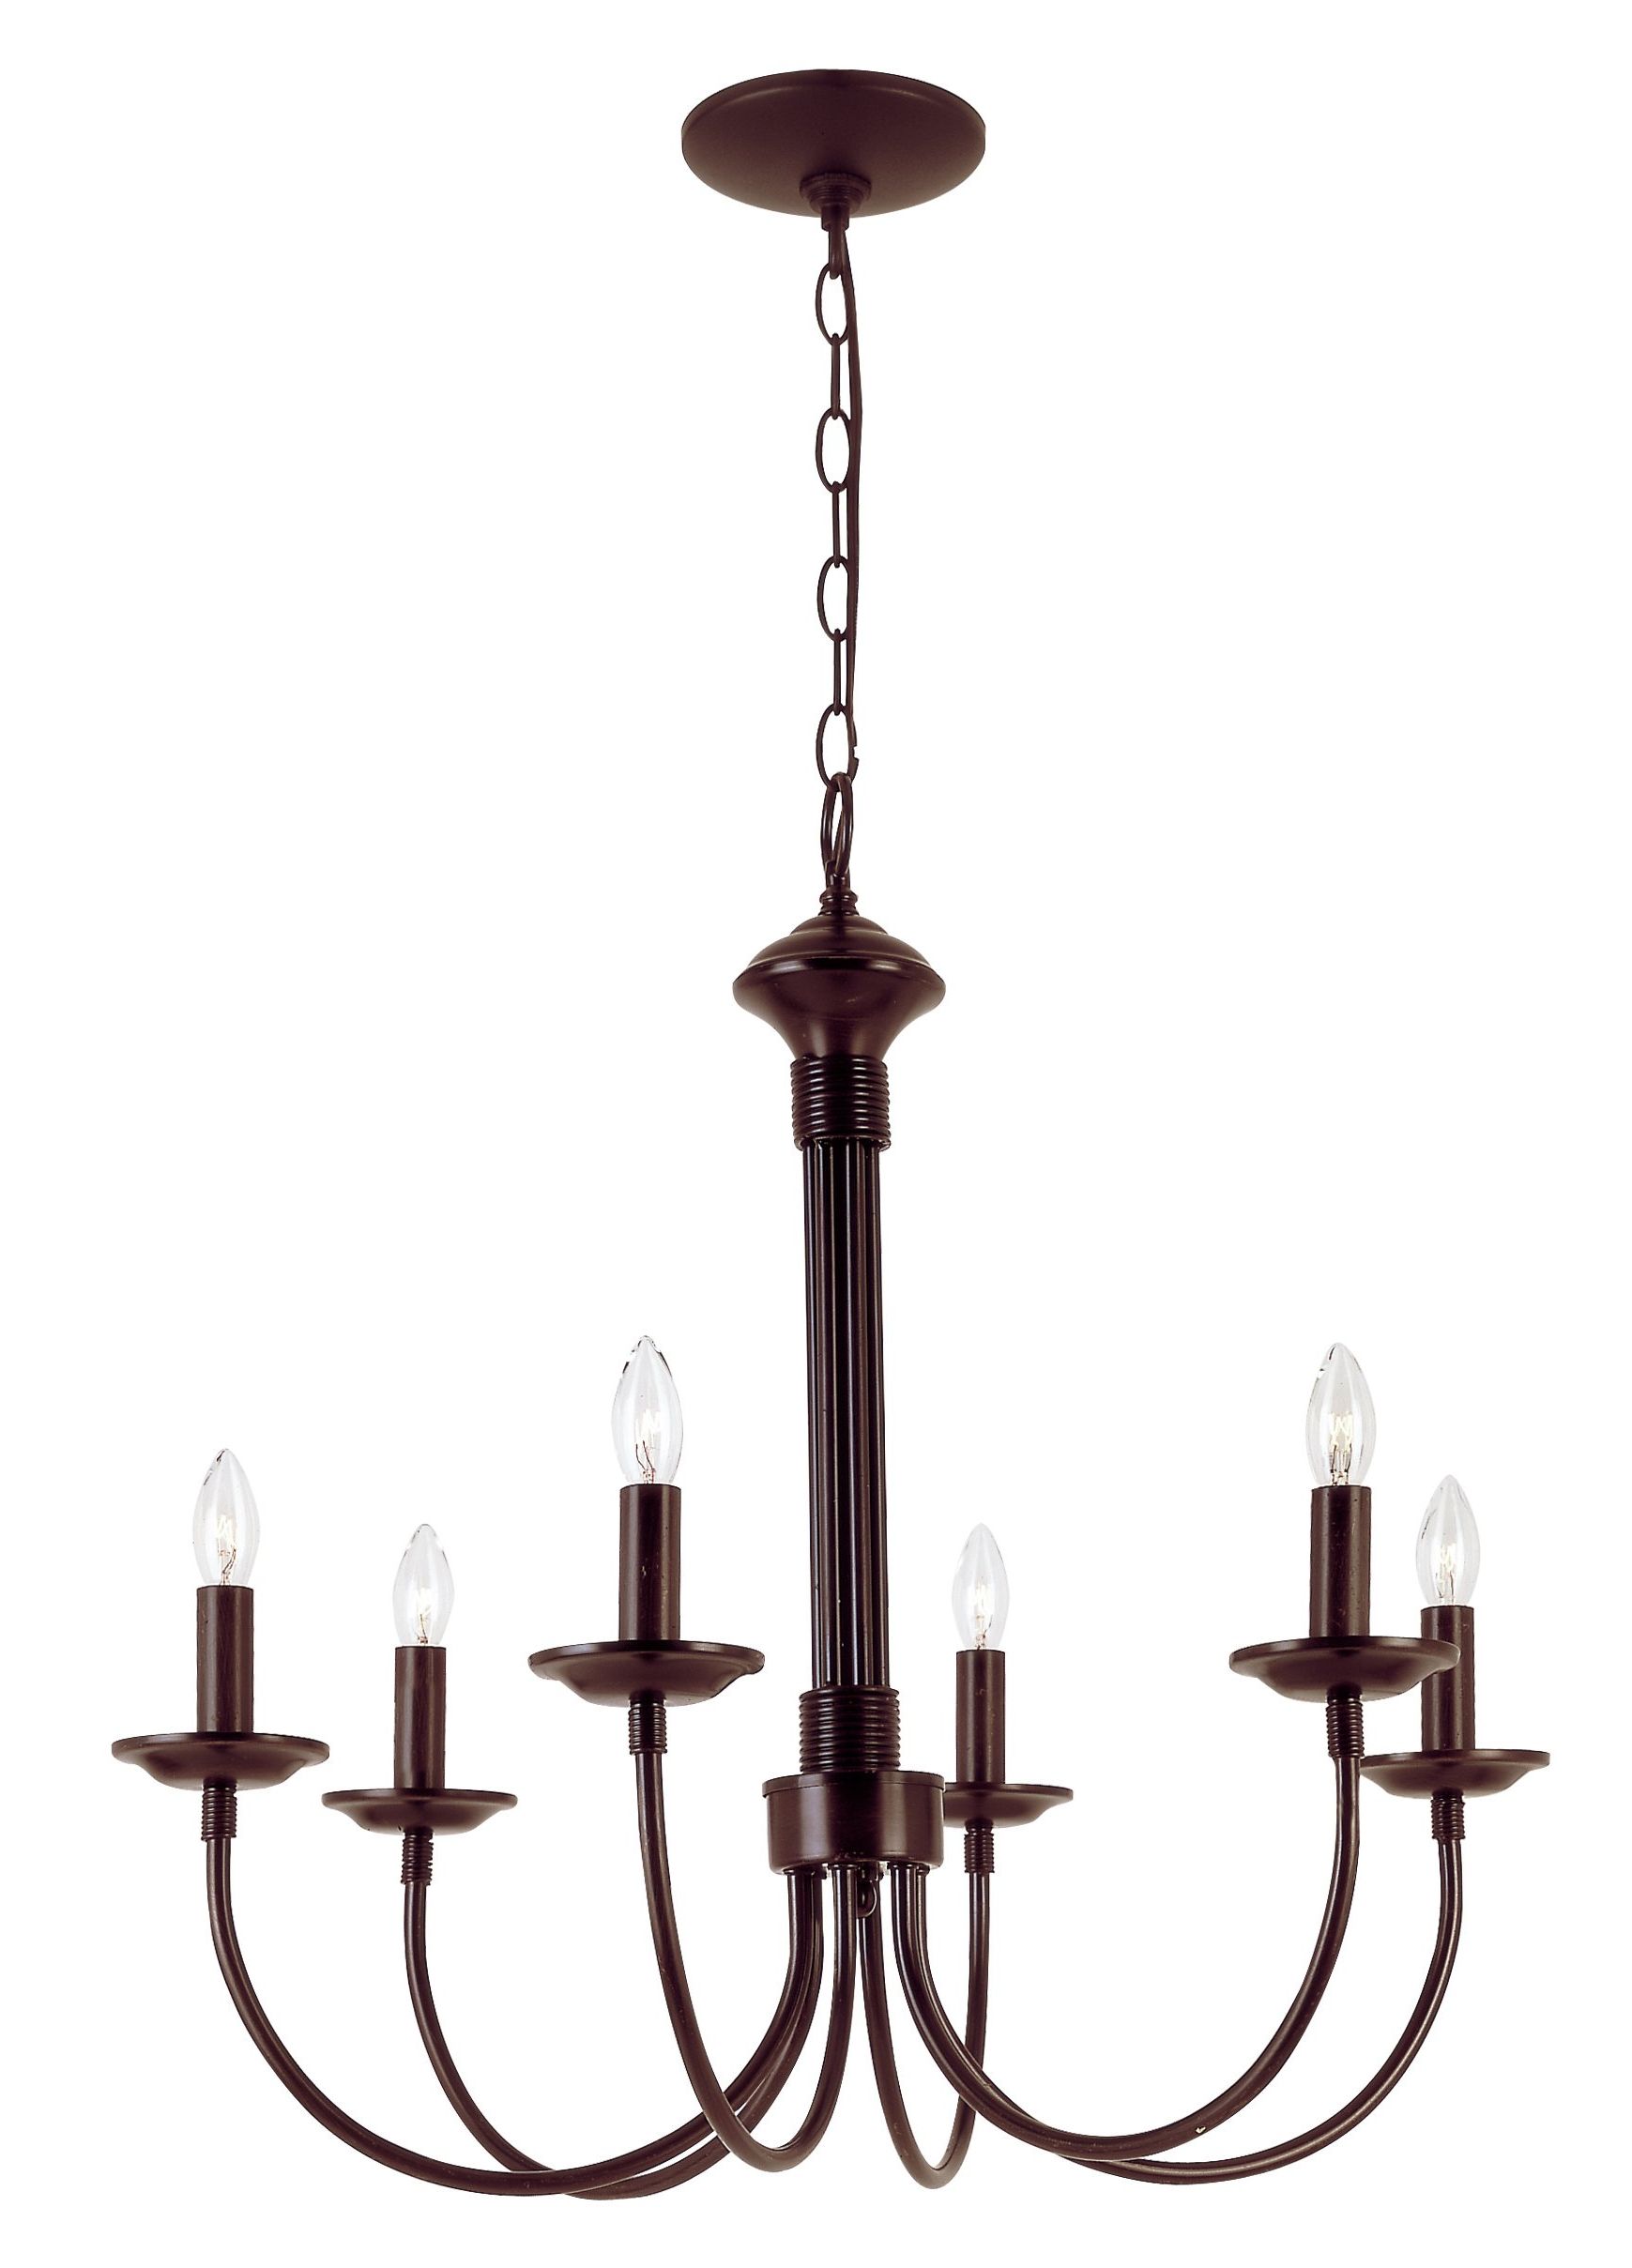 Shaylee 6 Light Candle Style Chandelier For Widely Used Shaylee 5 Light Candle Style Chandeliers (View 6 of 20)